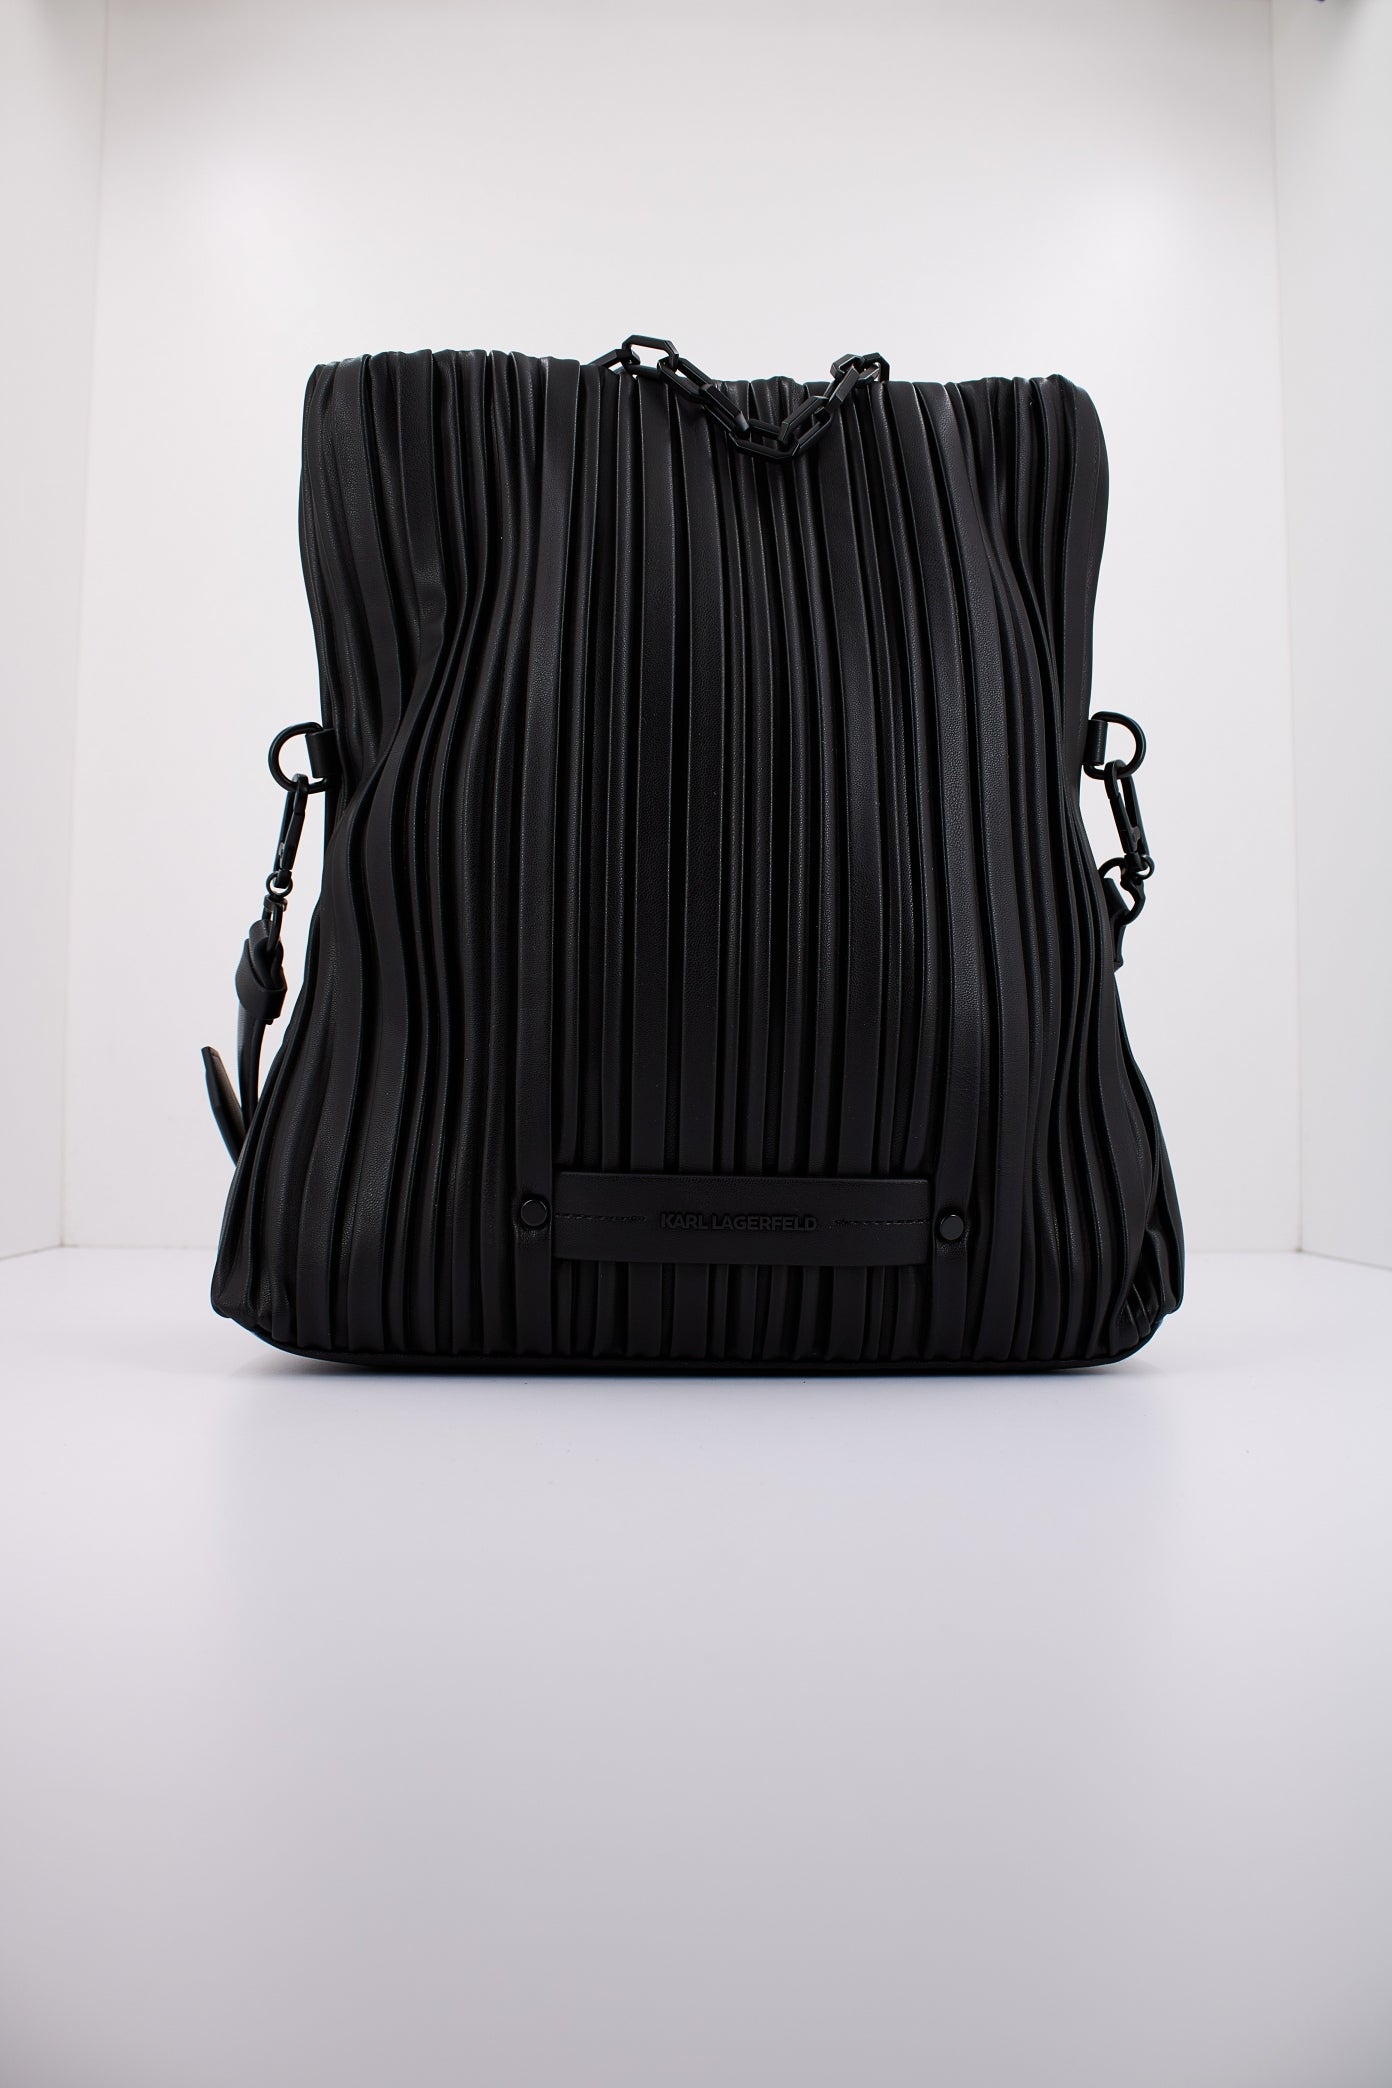 KARL LAGERFELD KUSIONS SM FOLDED TOTE en color NEGRO  (2)